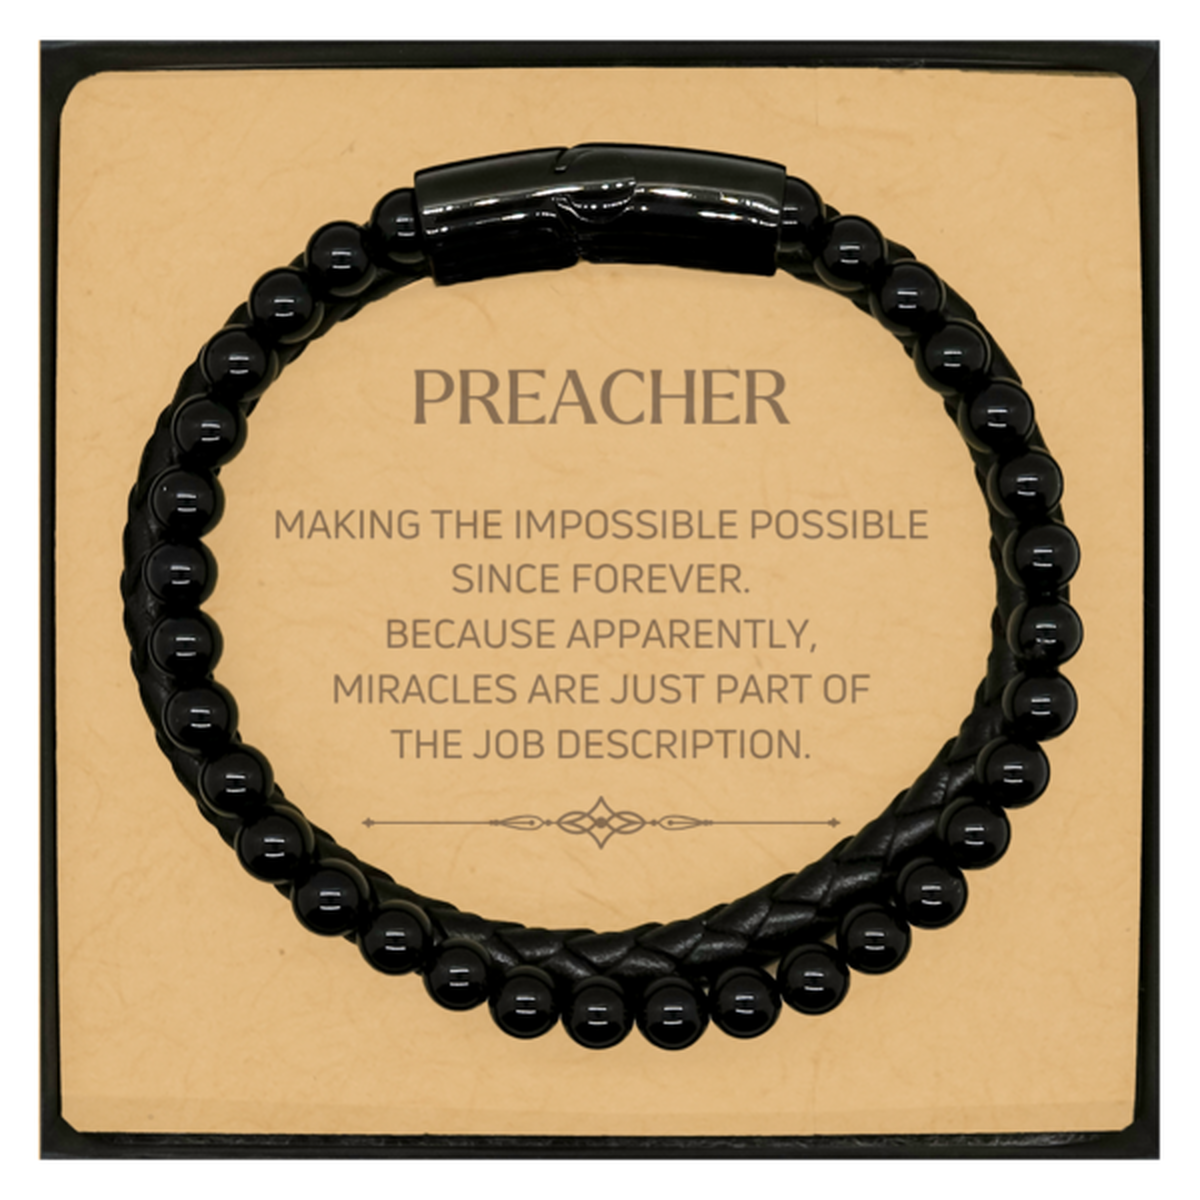 Funny Preacher Gifts, Miracles are just part of the job description, Inspirational Birthday Christmas Stone Leather Bracelets For Preacher, Men, Women, Coworkers, Friends, Boss